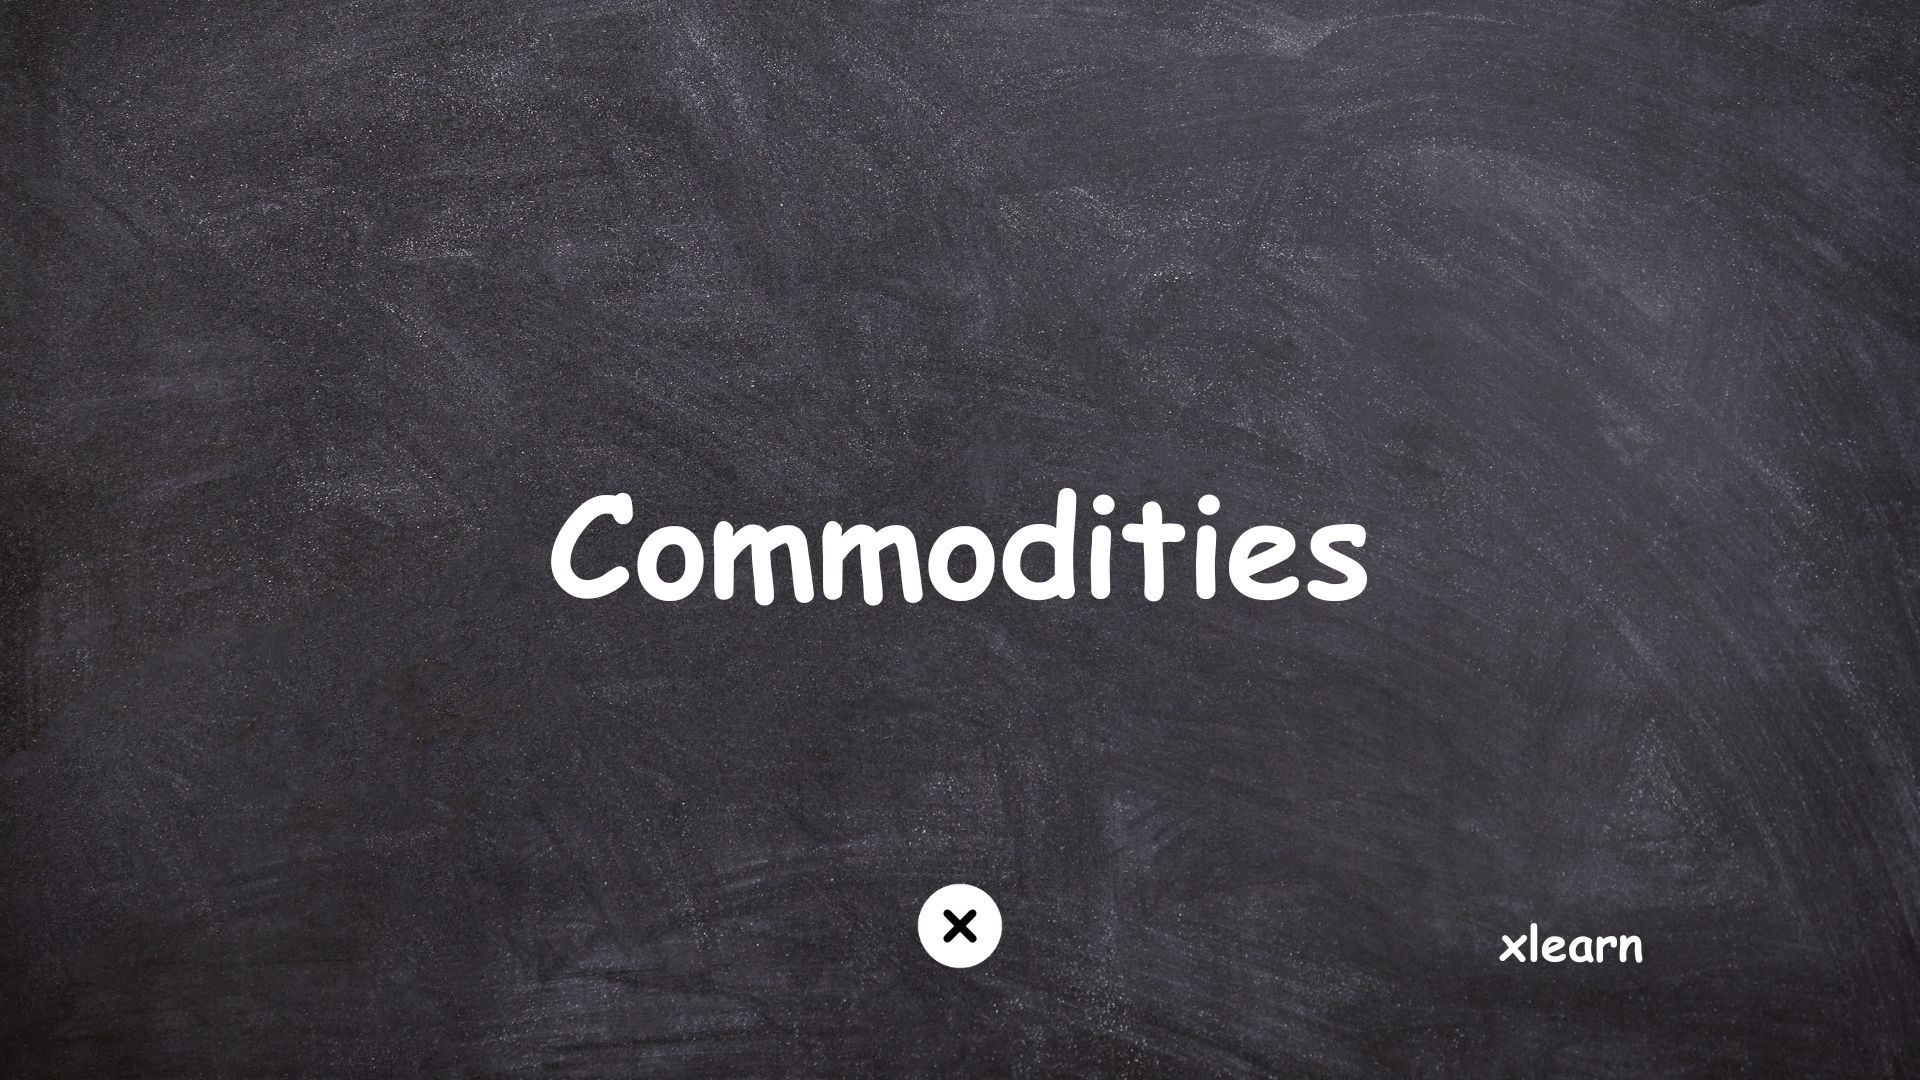 How to invest in commodities?